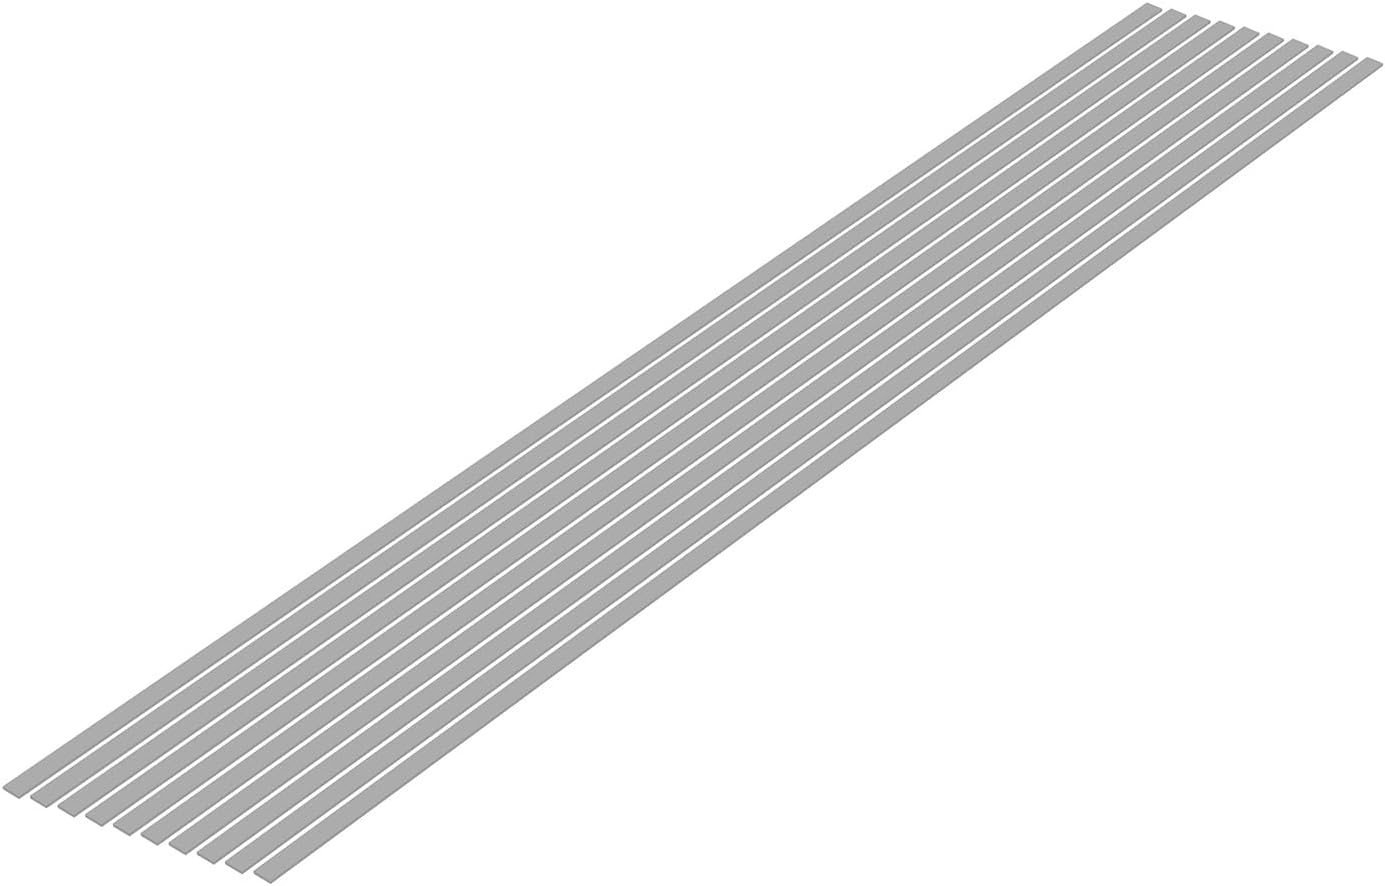 Wave Material Series OM-473 Plastic Material, Gray, Shredded Board, 0.02 x 0.12 inches (0.5 x 3.0 mm), 10 Pieces, Hobby Material - BanzaiHobby